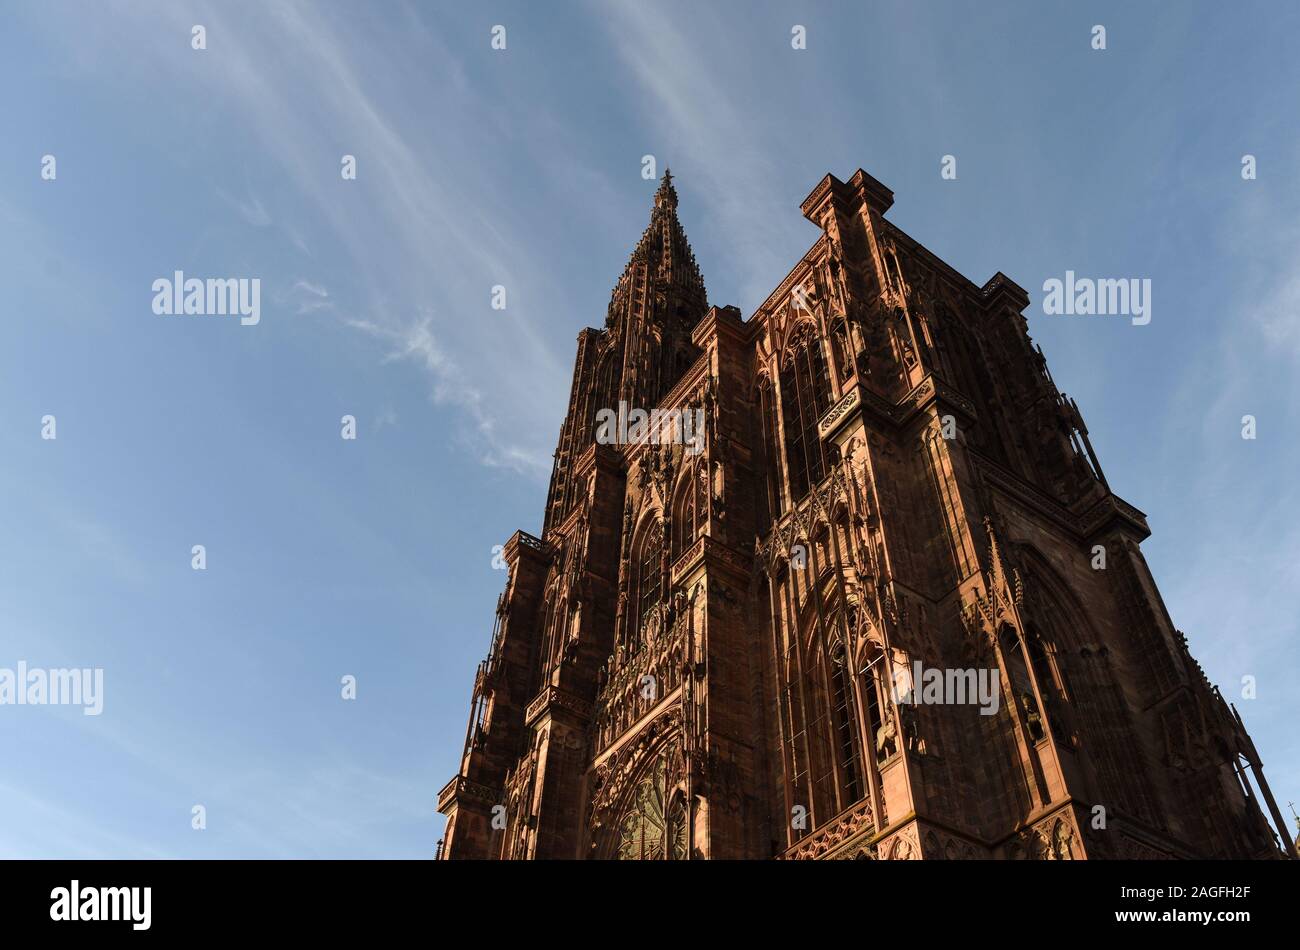 Strasbourg Cathedral or the Cathedral of Our Lady of Strasbourg in Strasbourg, France. Stock Photo